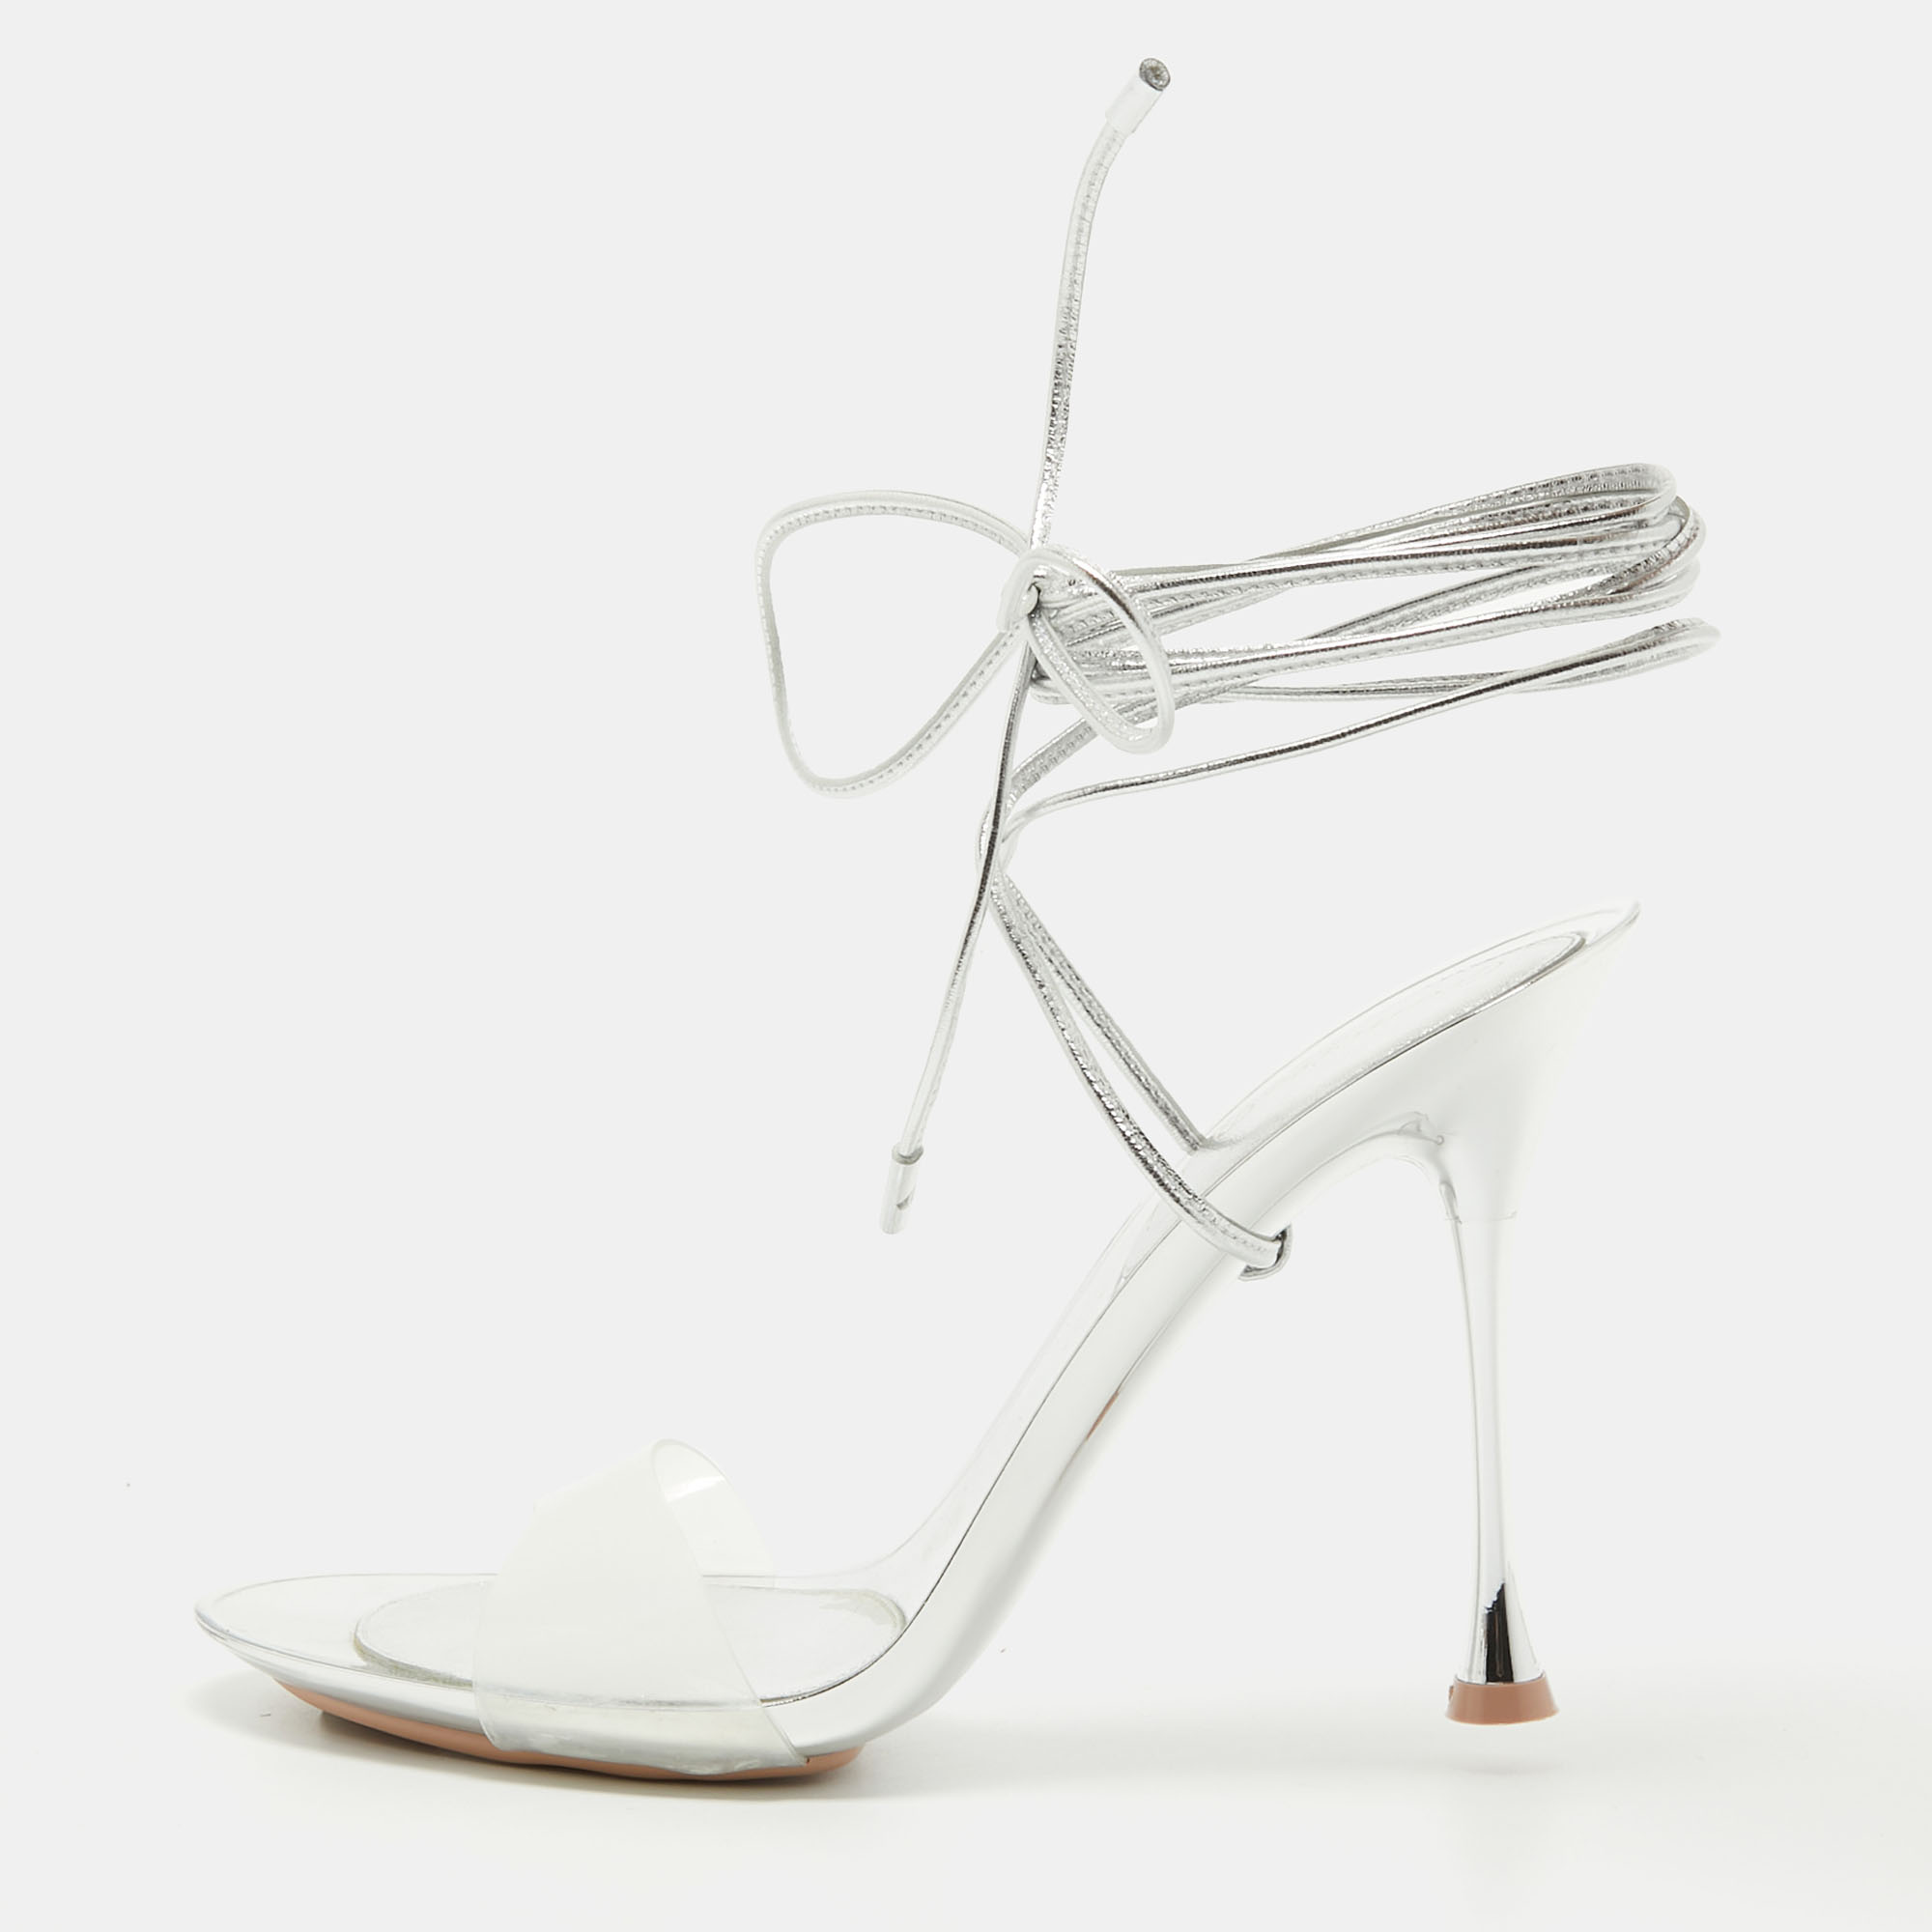 Gianvito rossi transparent/silver pvc and leather spice sandals size 38